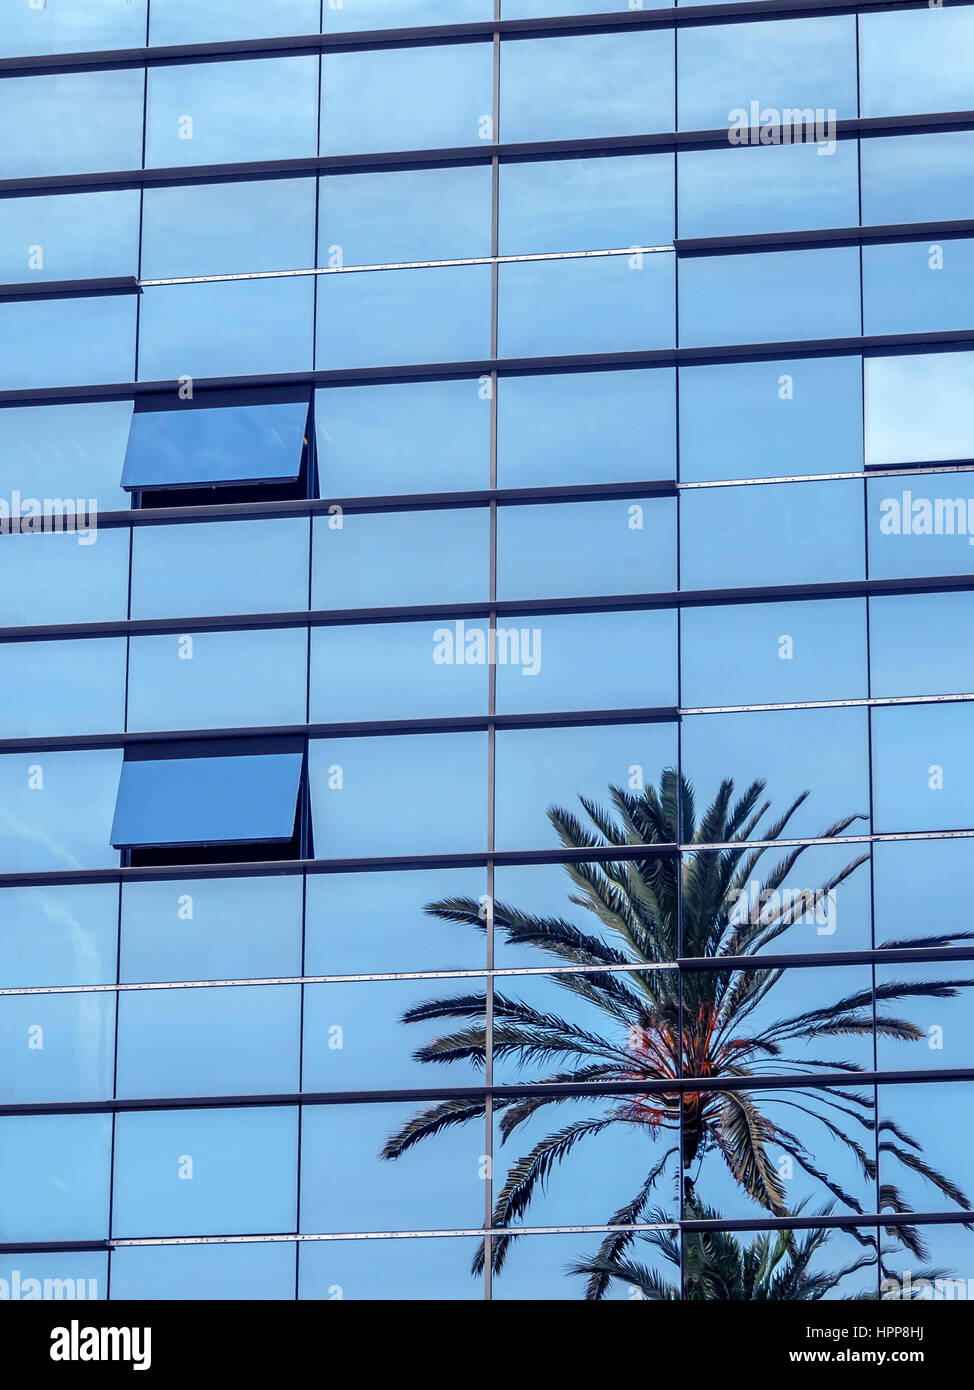 Spain, Barcelona, palm tree reflecting on glass front of modern office building Stock Photo